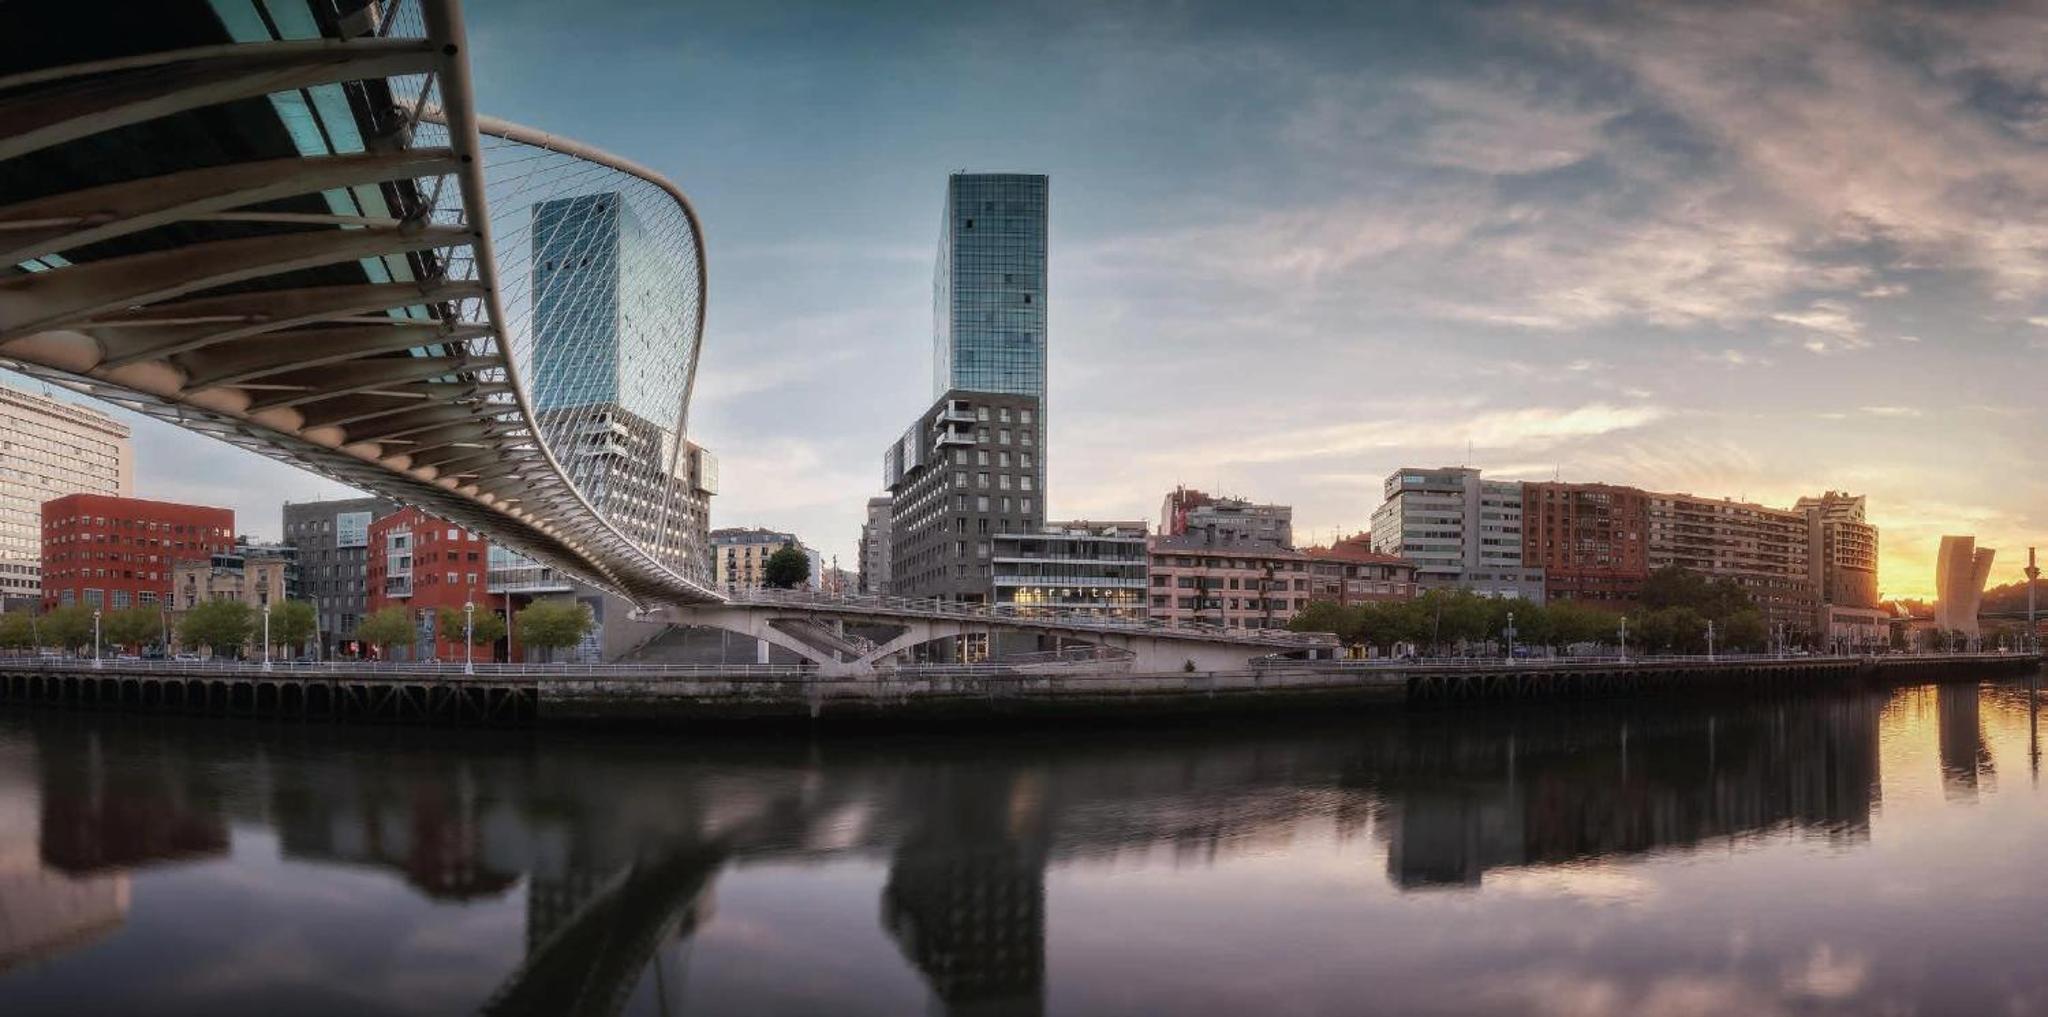 Bilbao City Center by abba Apartments